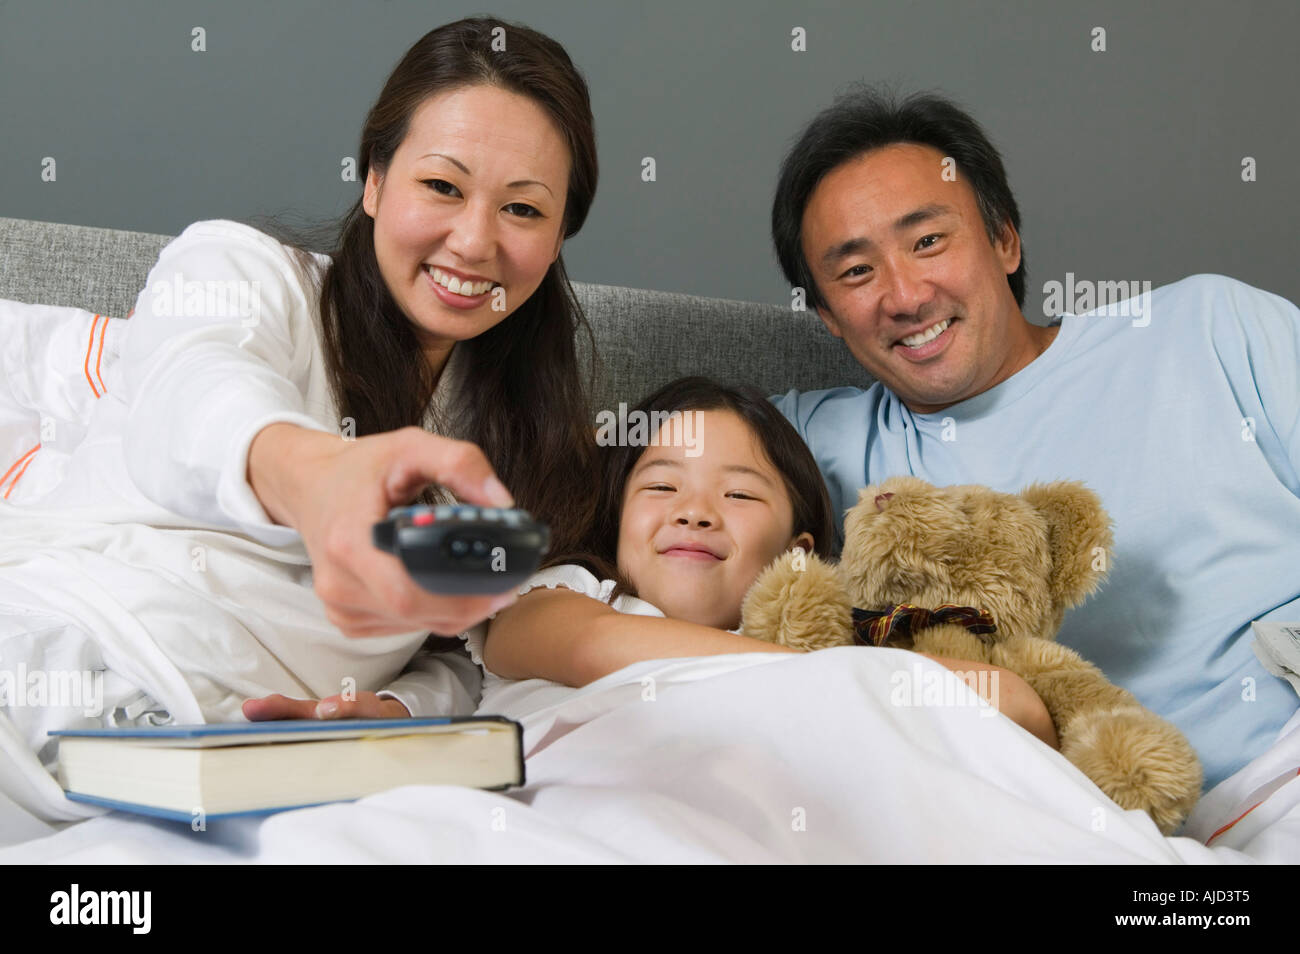 Family Watching TV Together in Bed, mother using remote control Stock Photo